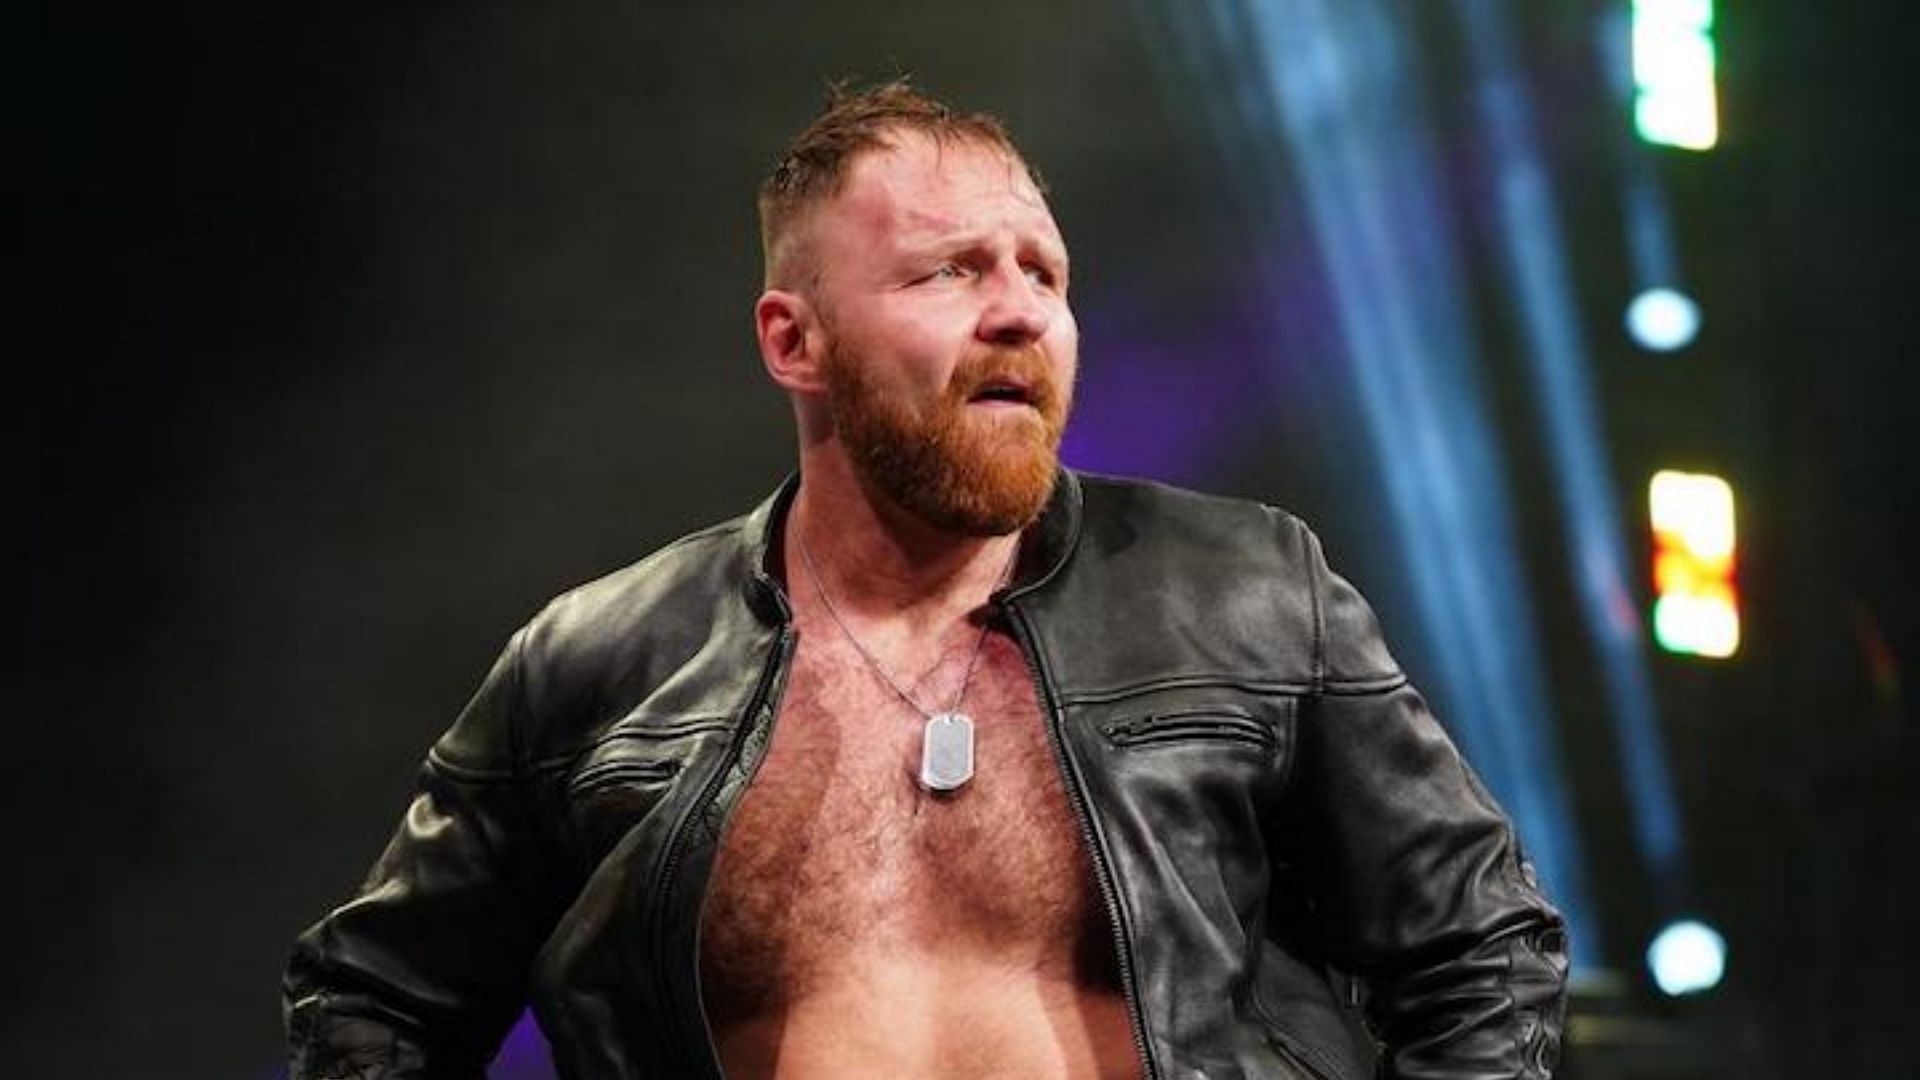 Jon Moxley is a former AEW World Champion.